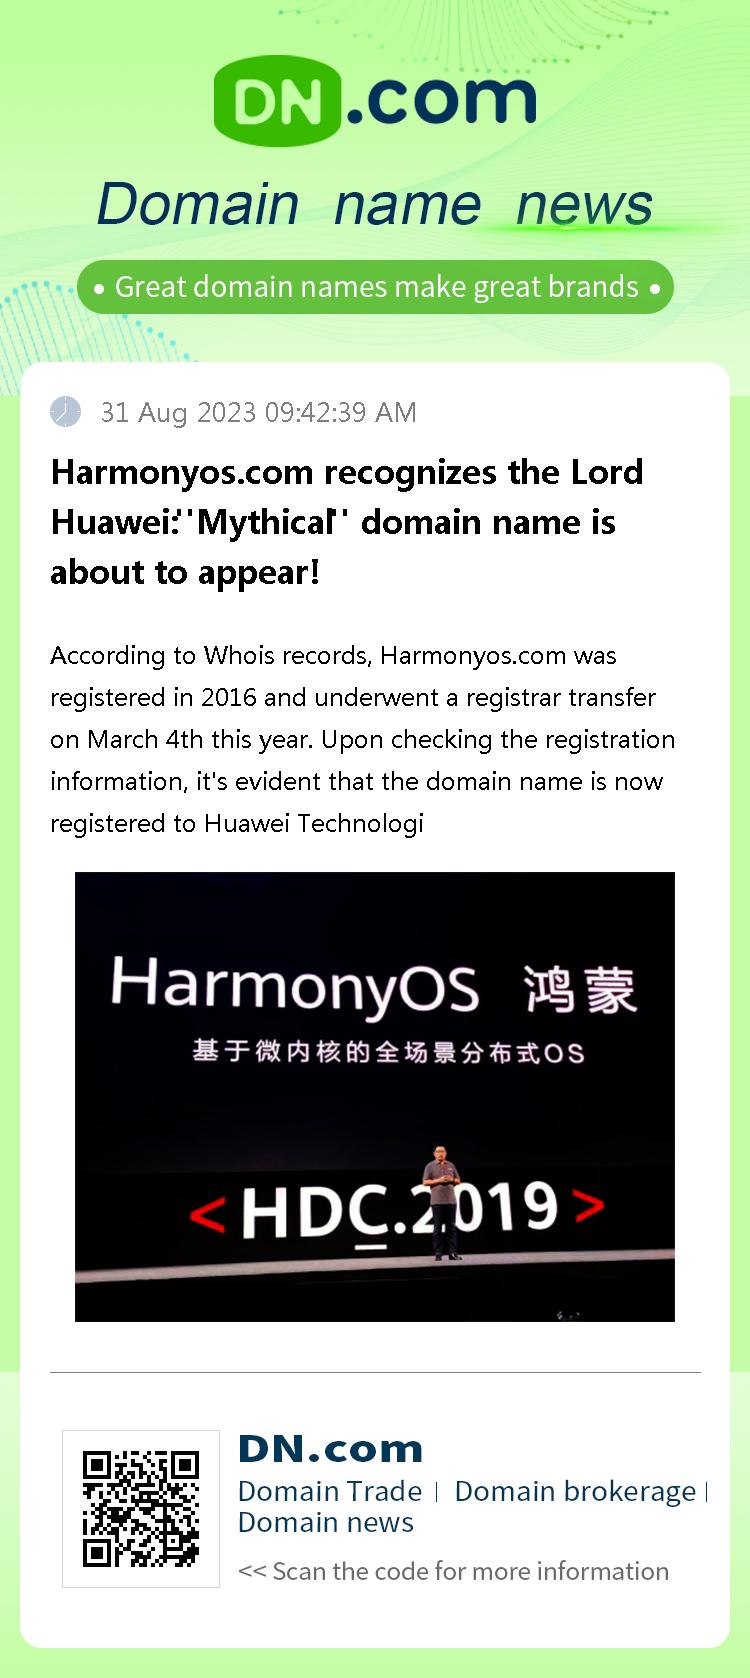 Harmonyos.com recognizes the Lord Huawei: